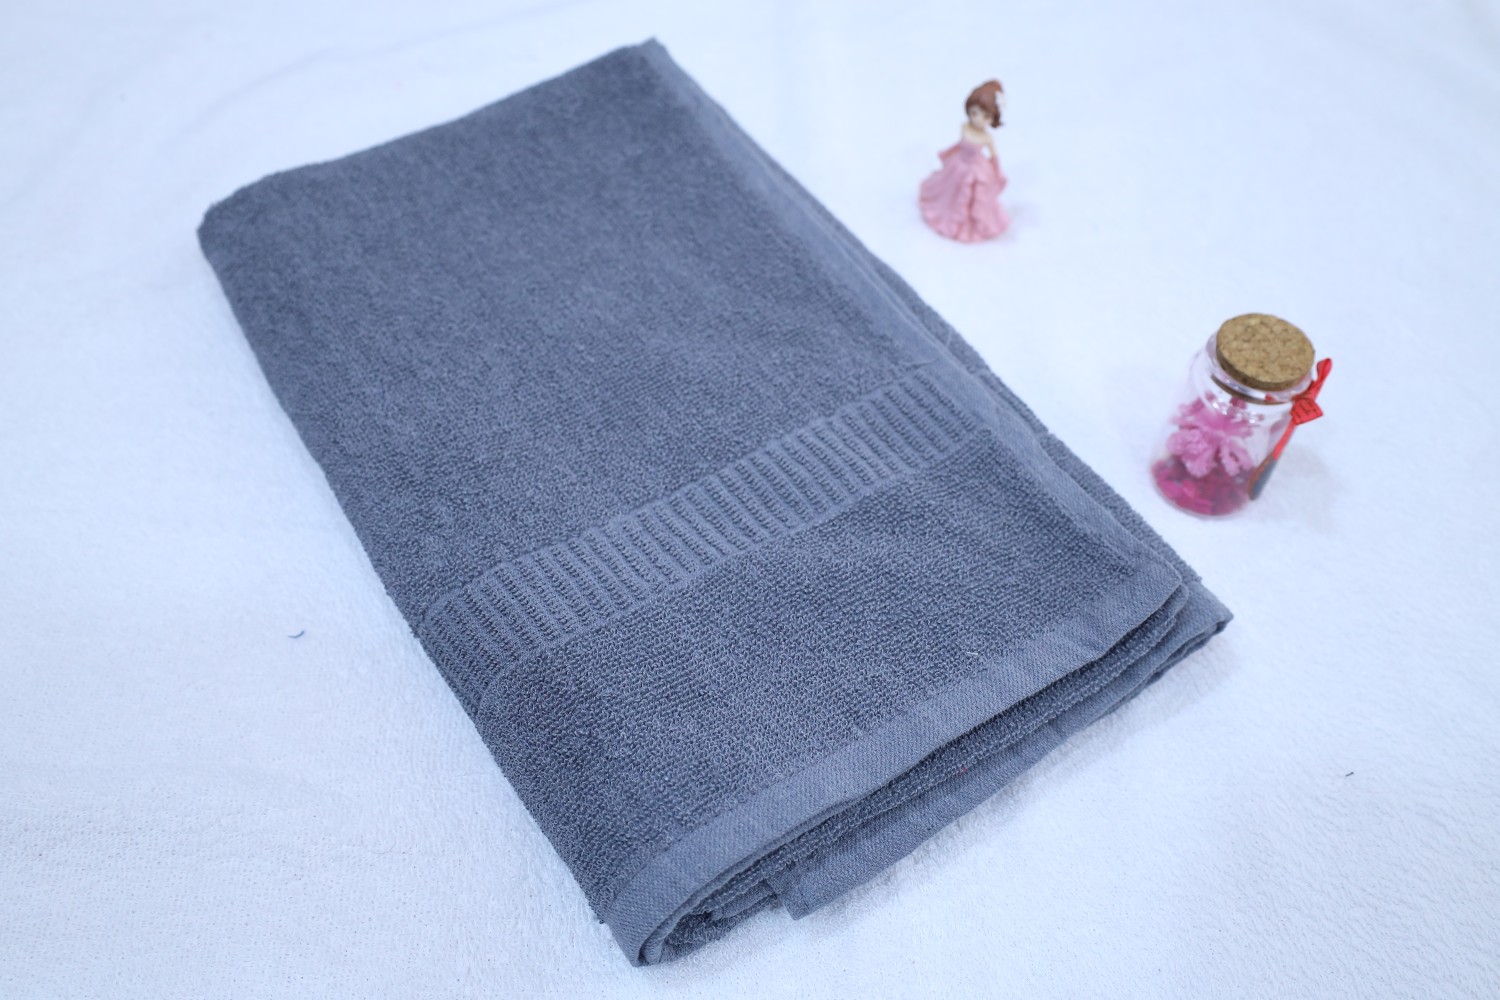 Taurusent Super Soft 100% Cotton High Absorbing Turkey Bath Towel, Size: 30x60 inches (450 GSM) - Pack of 1(GREY)